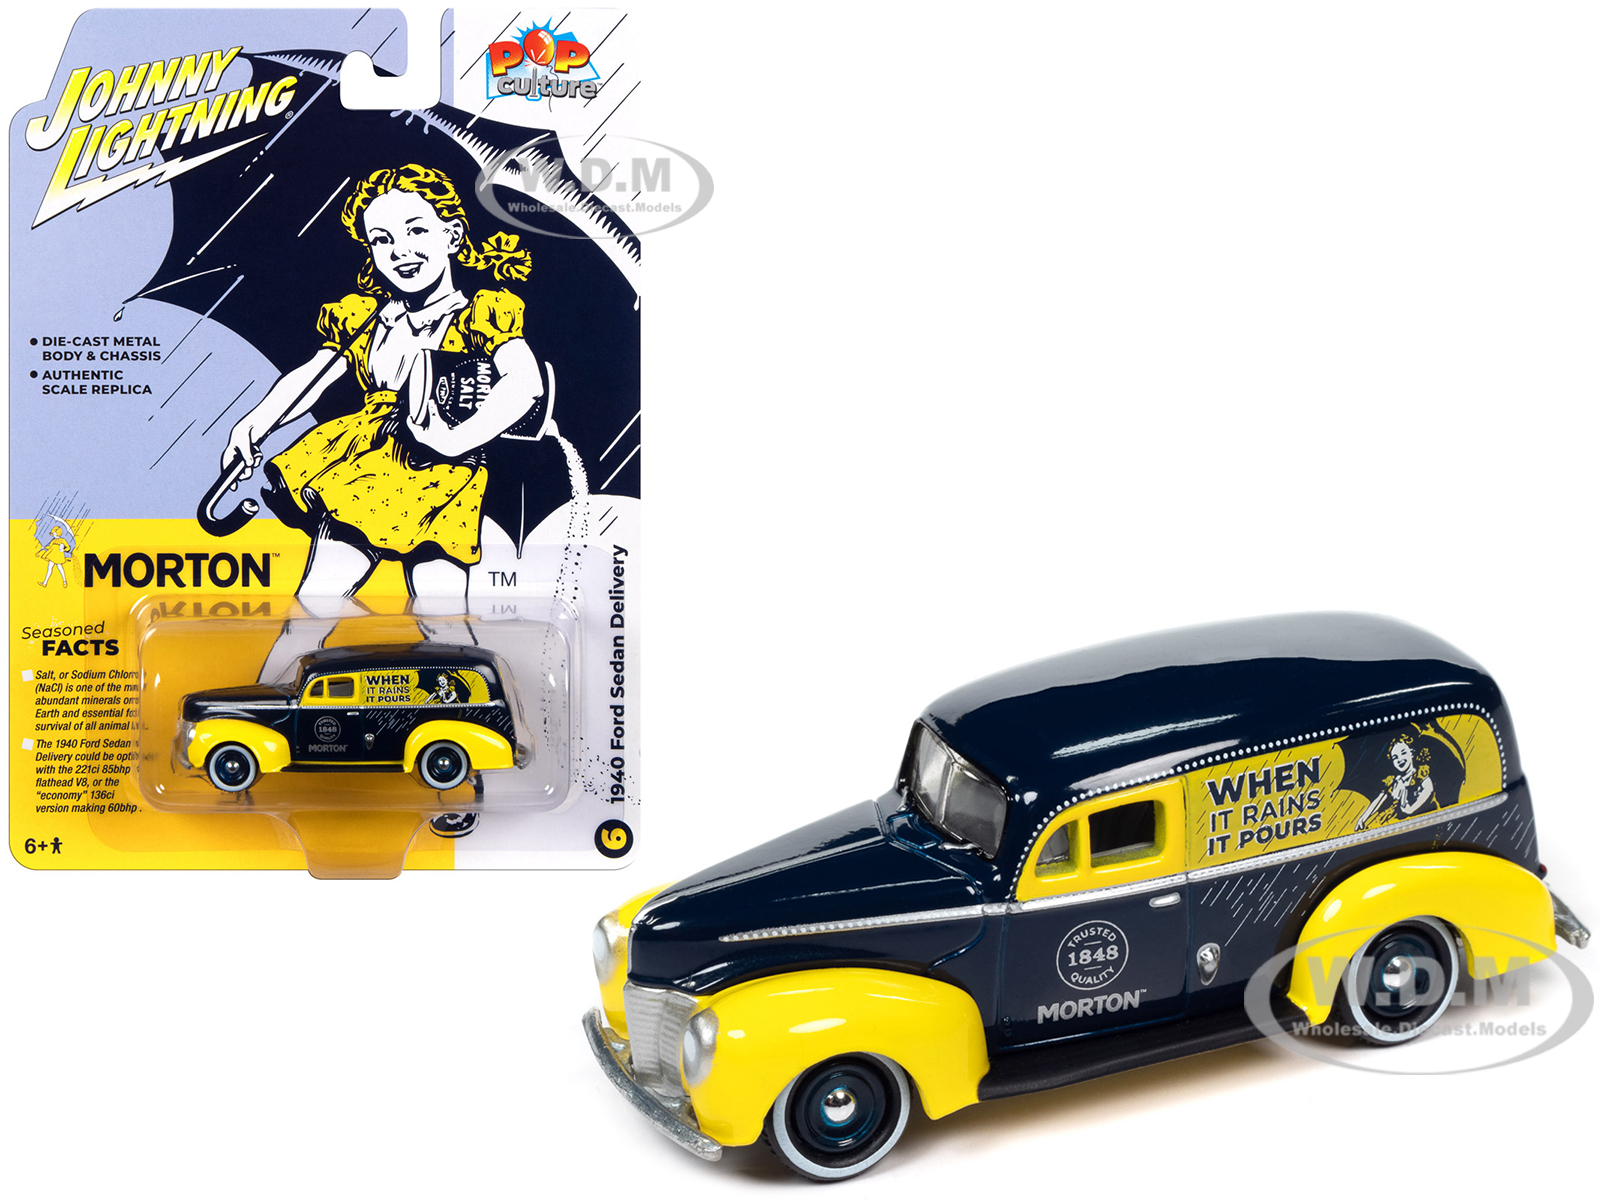 1940 Ford Sedan Delivery Dark Blue and Yellow "Morton Salt" "Pop Culture" 2023 Release 3 1/64 Diecast Model Car by Johnny Lightning